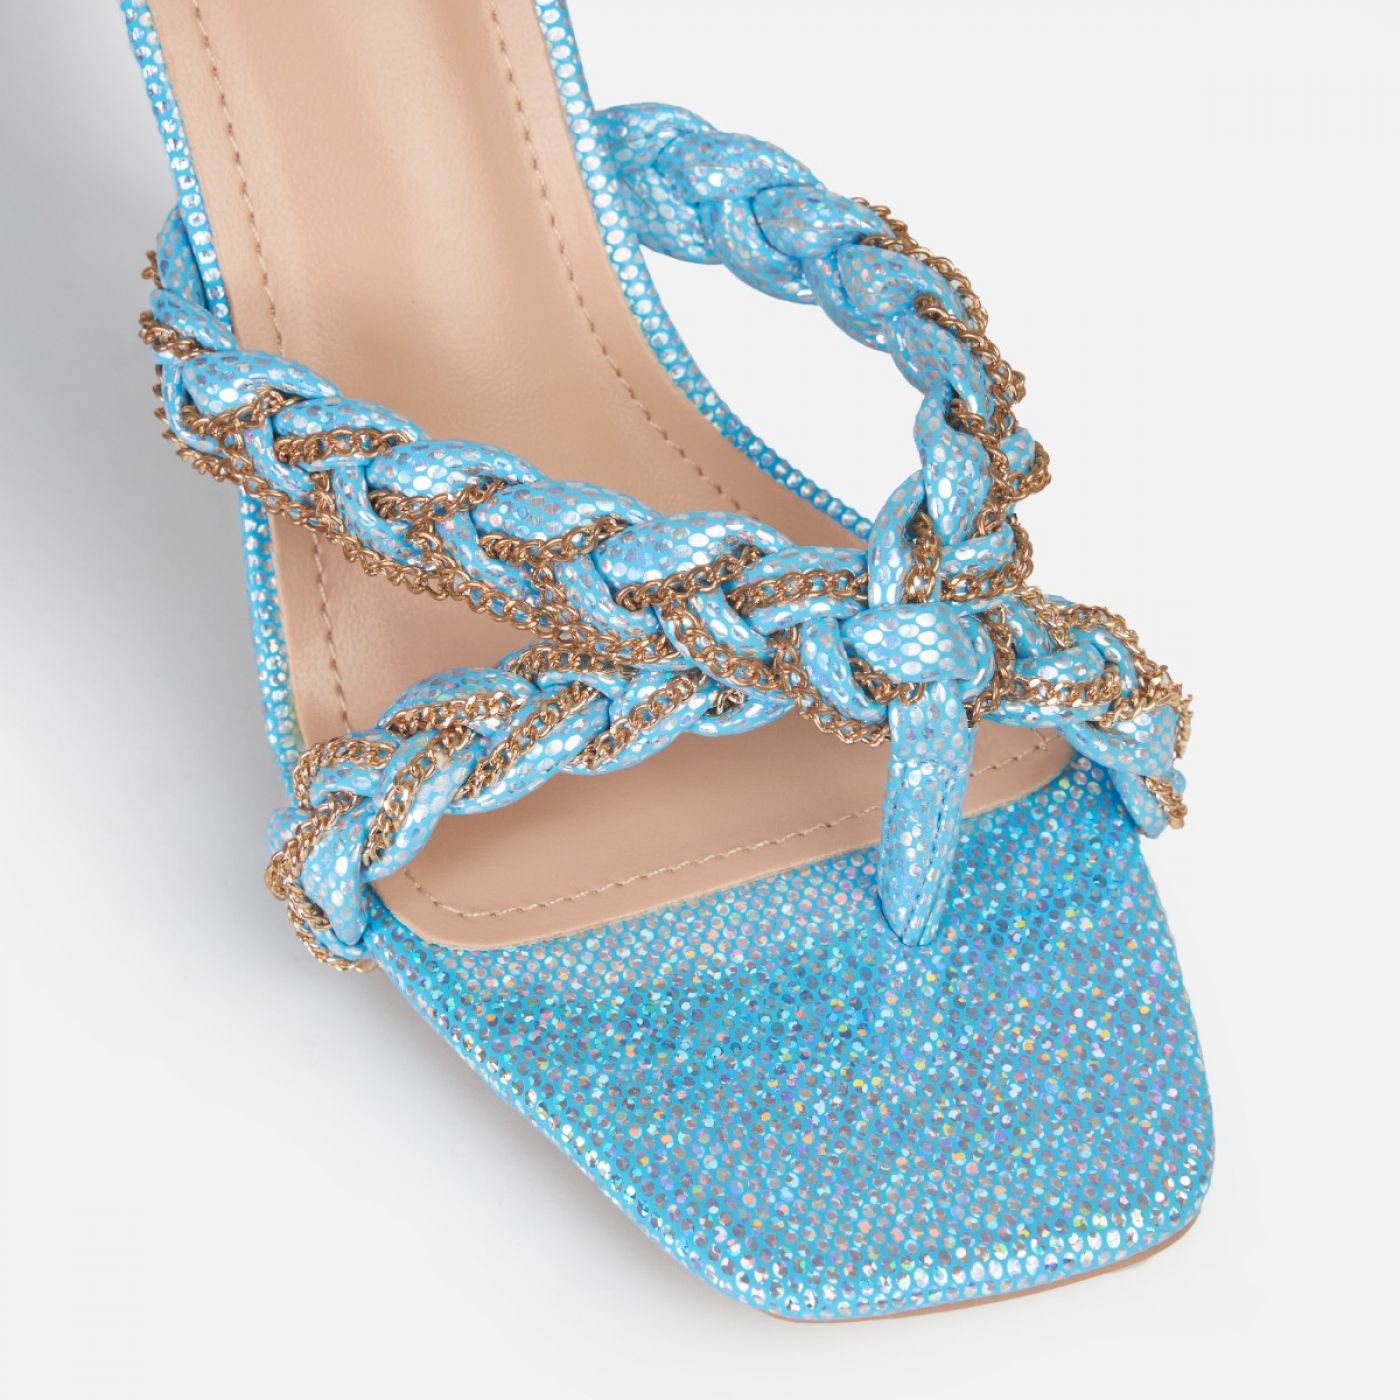 Norah Blue Glitter Chain Woven Lace Up Clear Stiletto Heels | SIMMI London